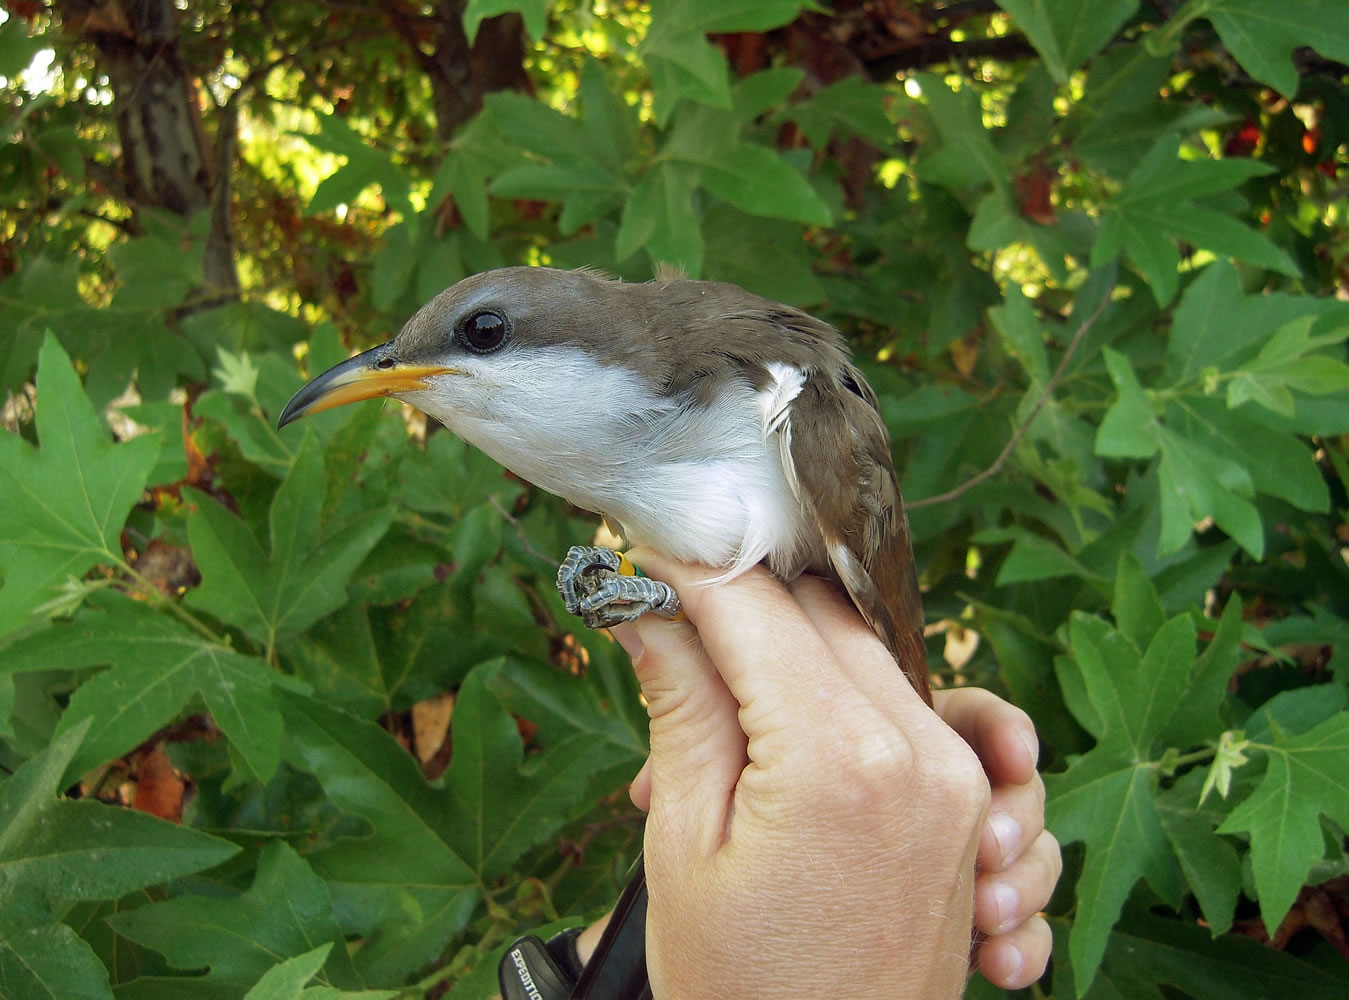 MARK DETTLING/Blue Point Conservation Science
The yellow-billed cuckoo lives in 12 western states and in Mexico and Canada; Arizona has the largest population.